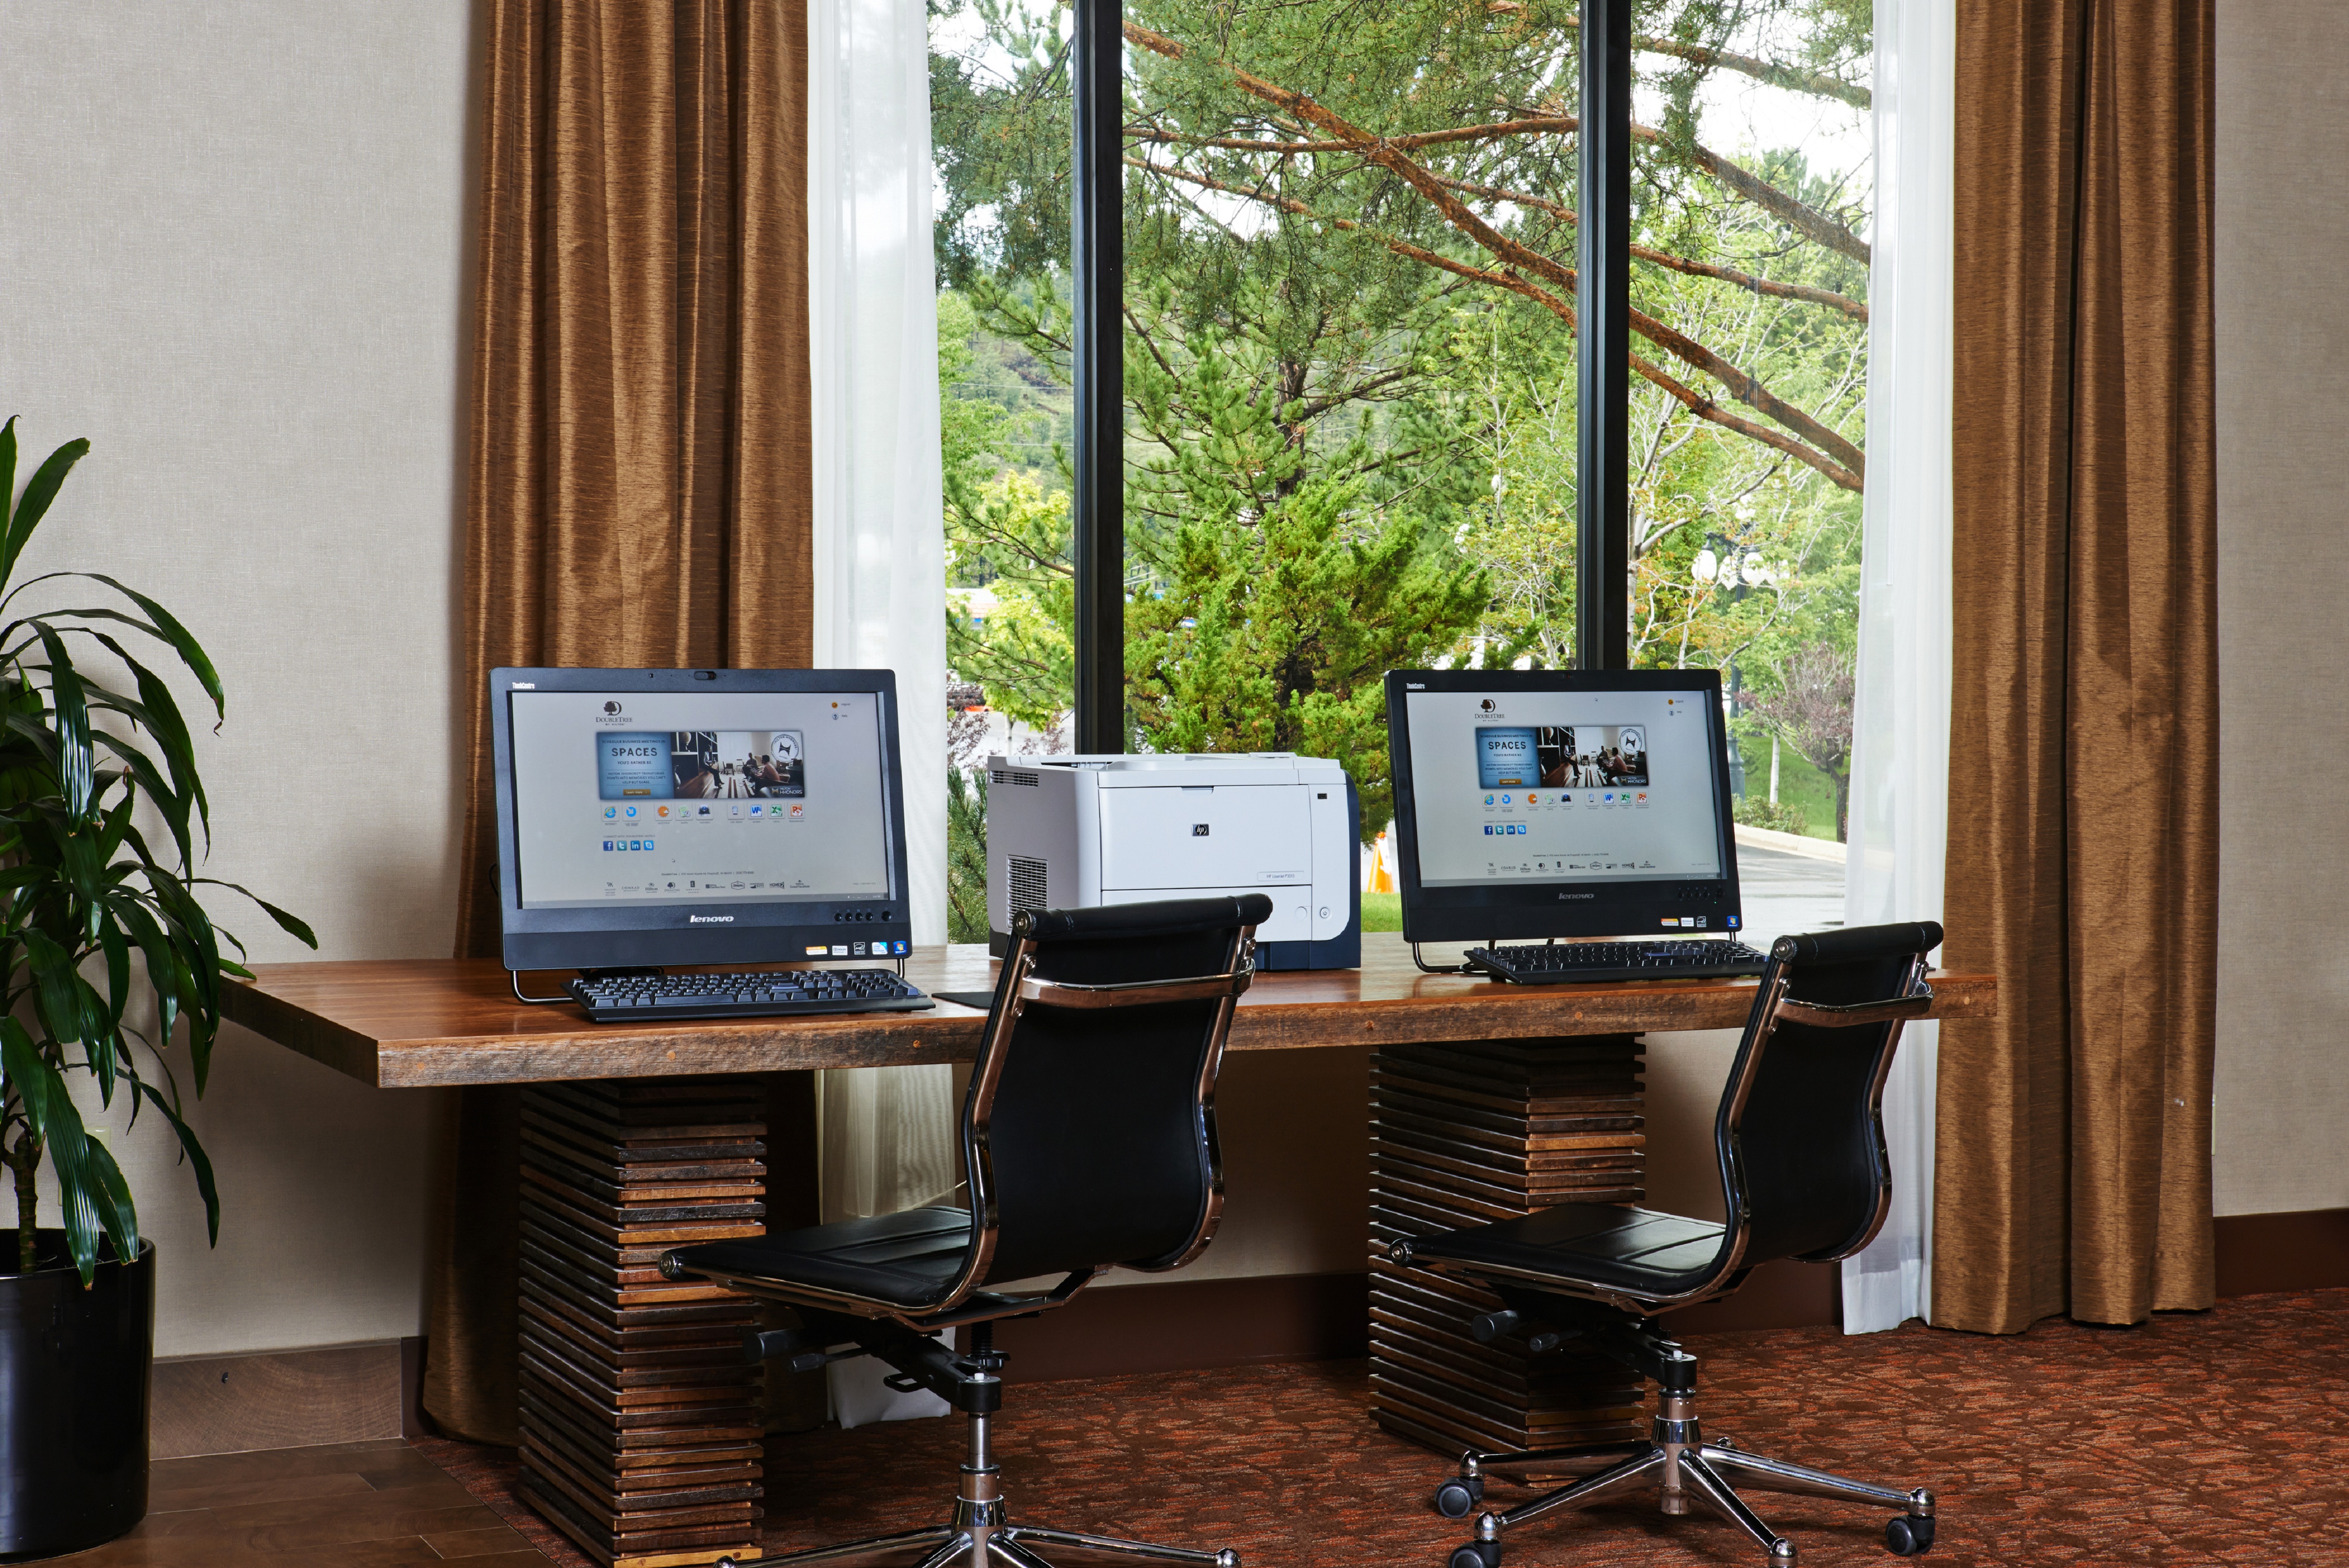 Business Center With Two Computers and Printer on Work Desk by Window With Open Drapes